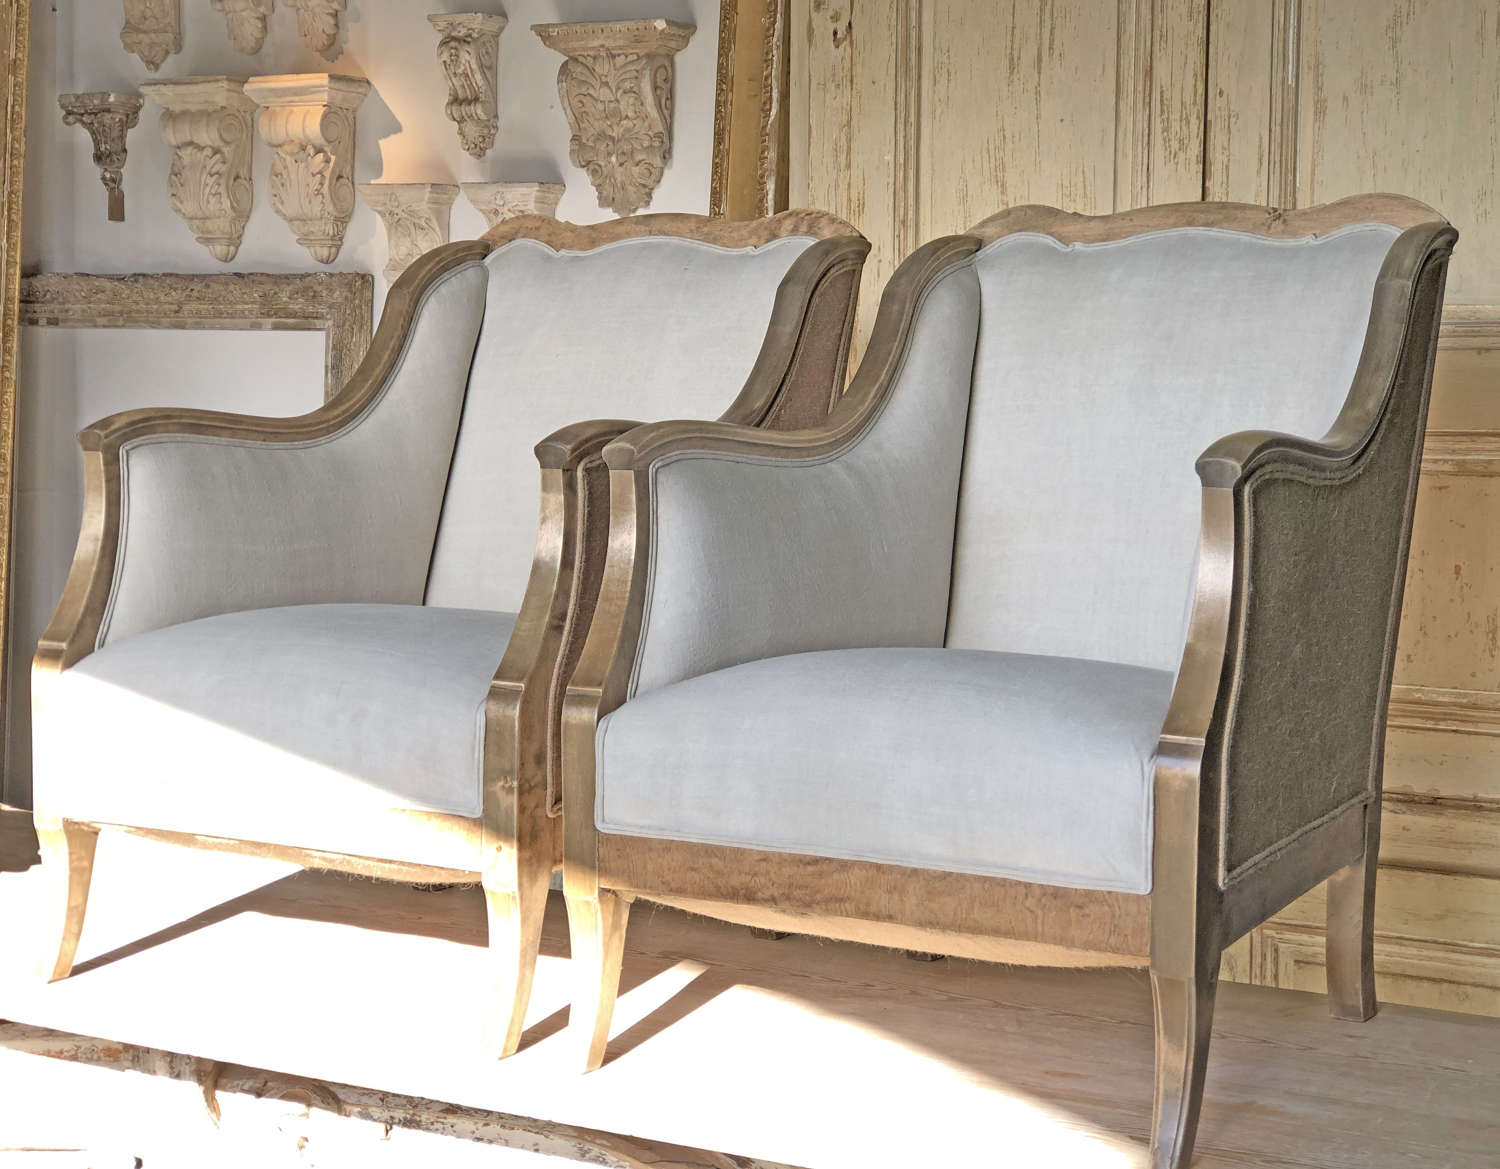 Pair of Swedish Armchairs with linen upholstery c 1880